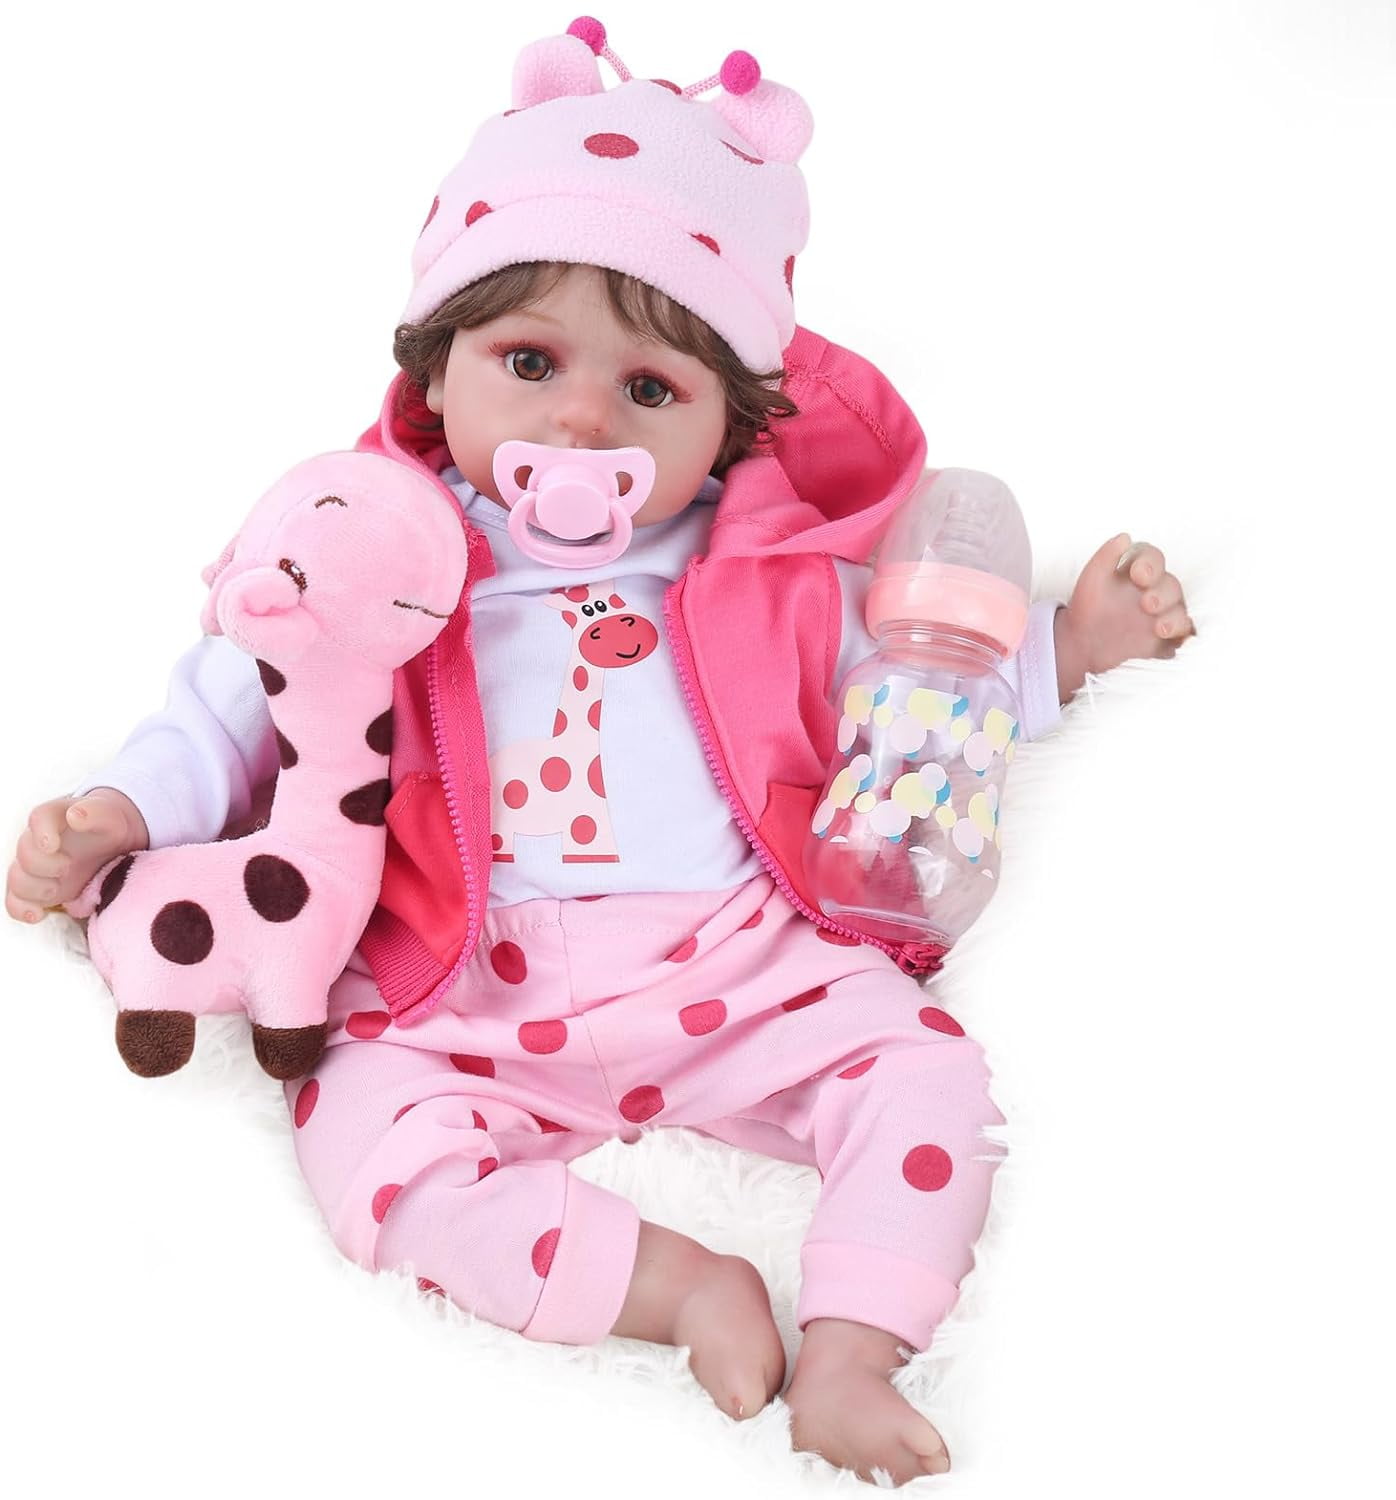  Pinky Reborn 23Inch Reborn Toddler Dolls Girl,Lifelike Newborn  Baby Dolls Silicone Weighted Body,Gift for Kids Age 3+ (Reborn Toddler  Pink) : Toys & Games